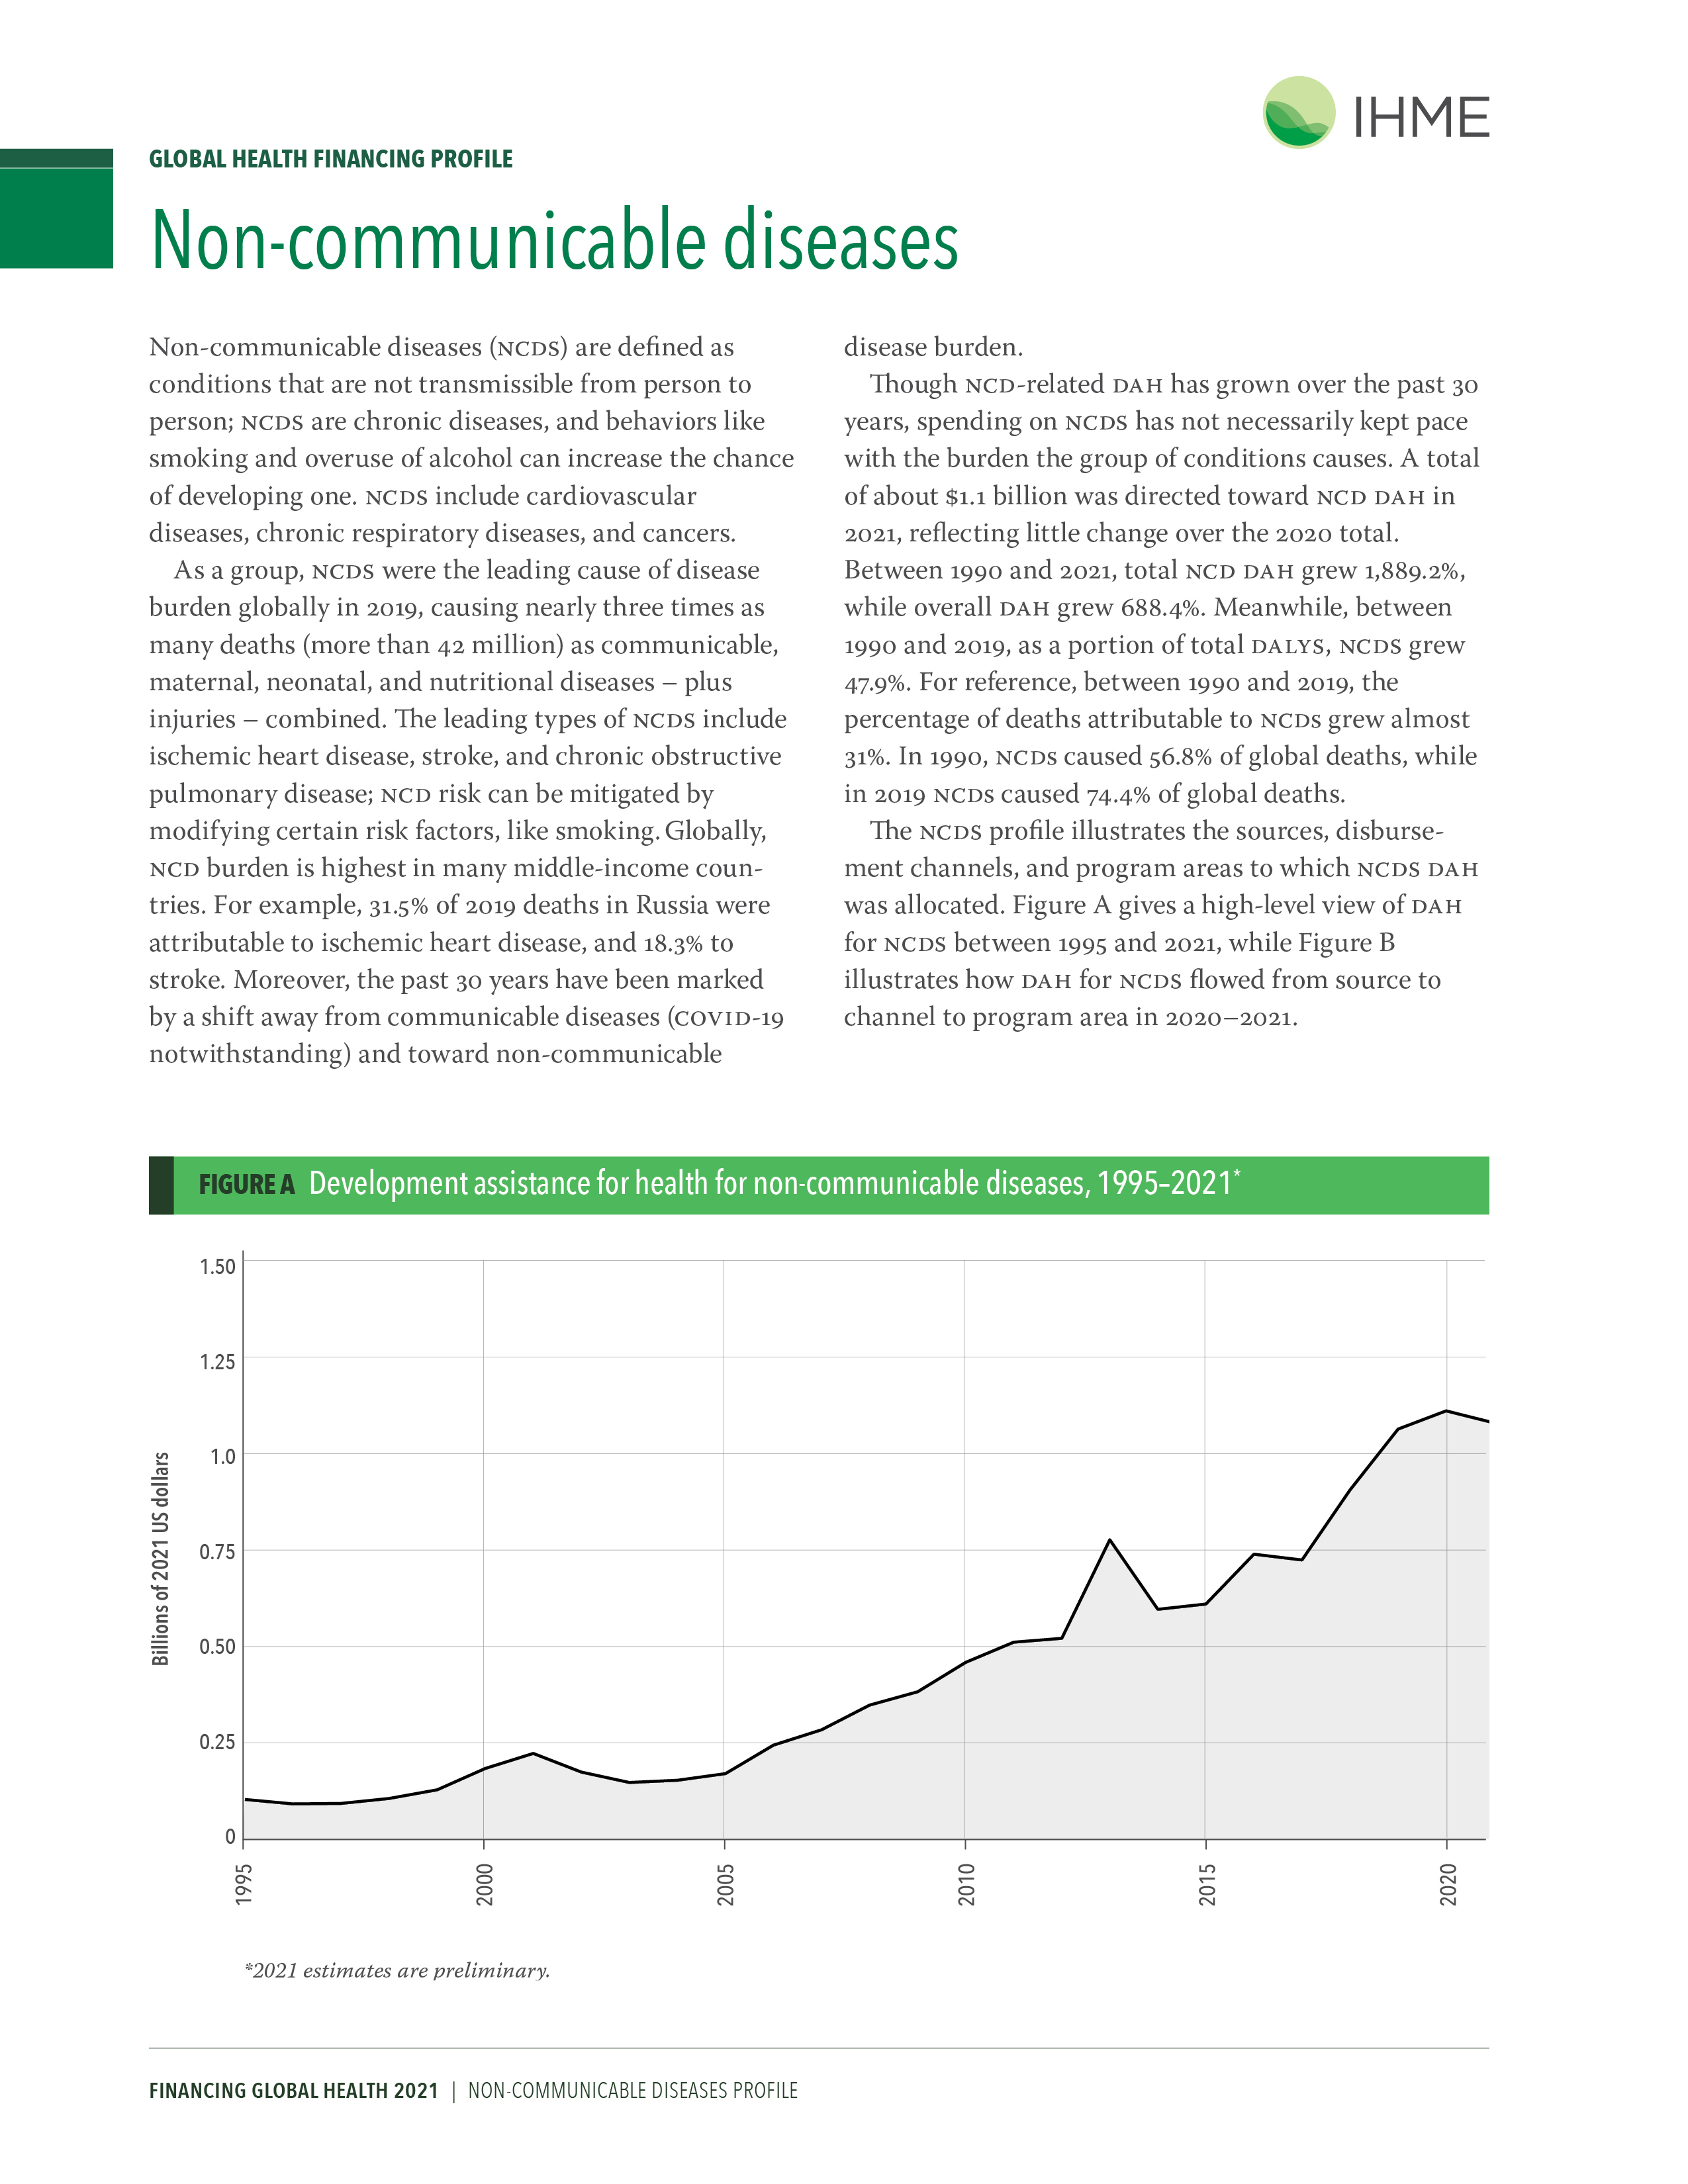 Disease spending profile for non-communicable diseases: page 1 provides an overview of the expenses of non-communicable diseases globally and development assistance for health. Download the profile for more details. 